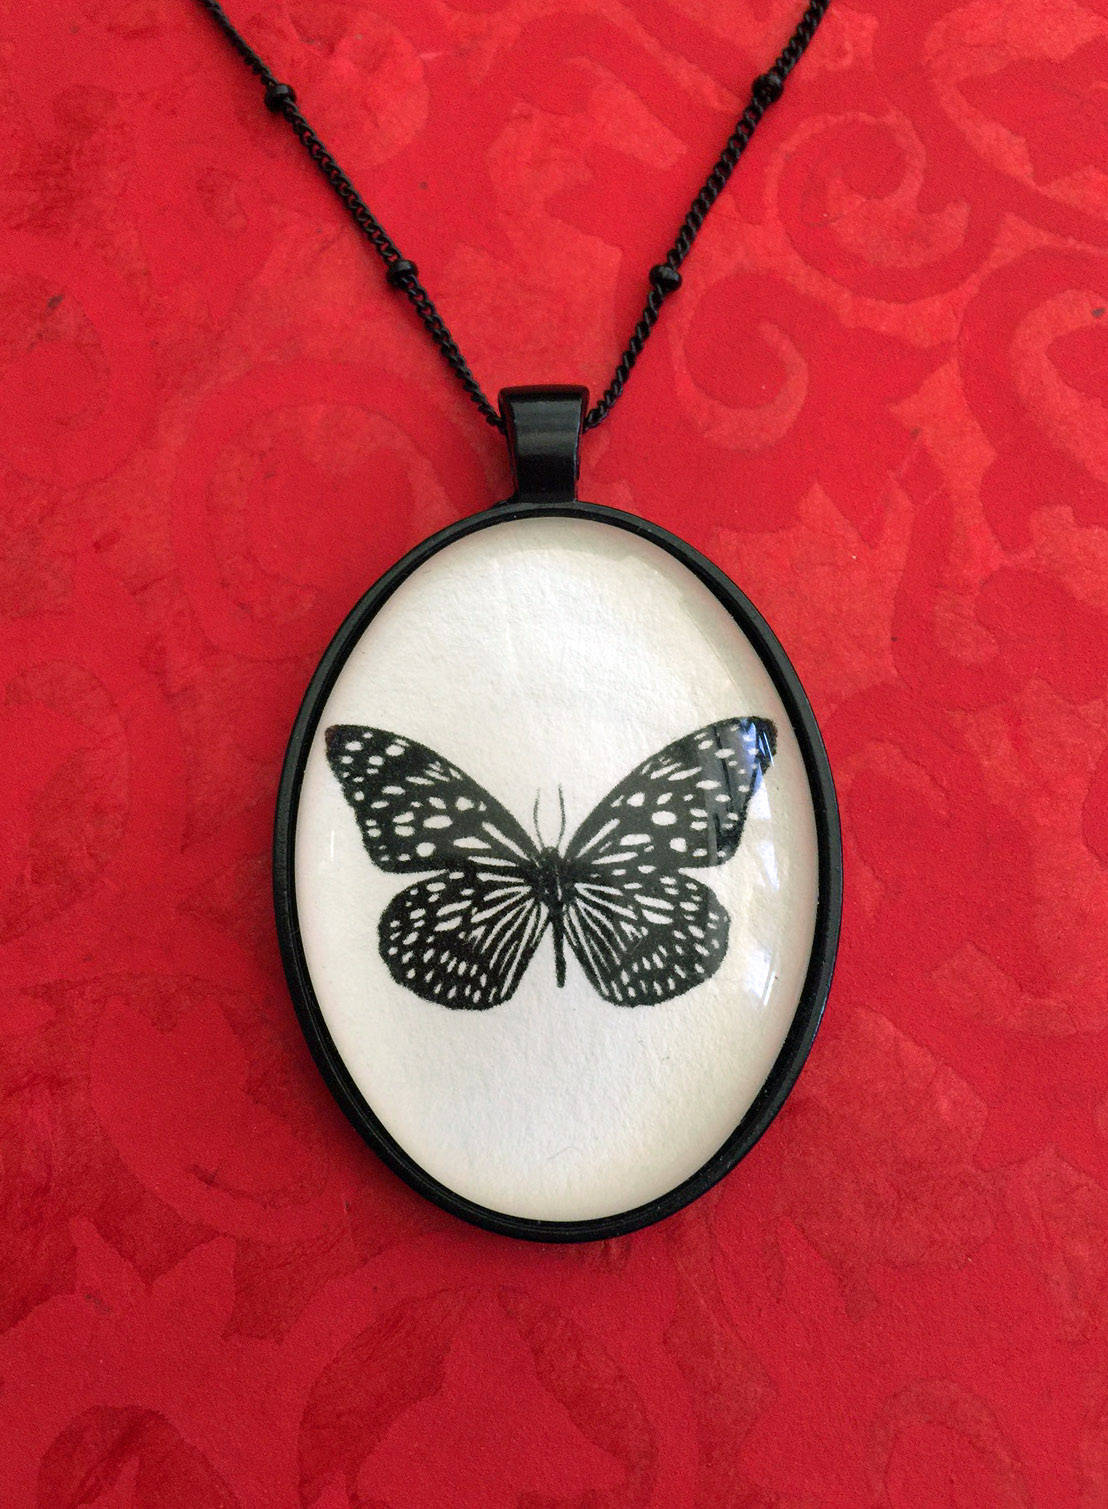 TIGER BUTTERFLY Necklace, pendant on chain - Silhouette Jewelry